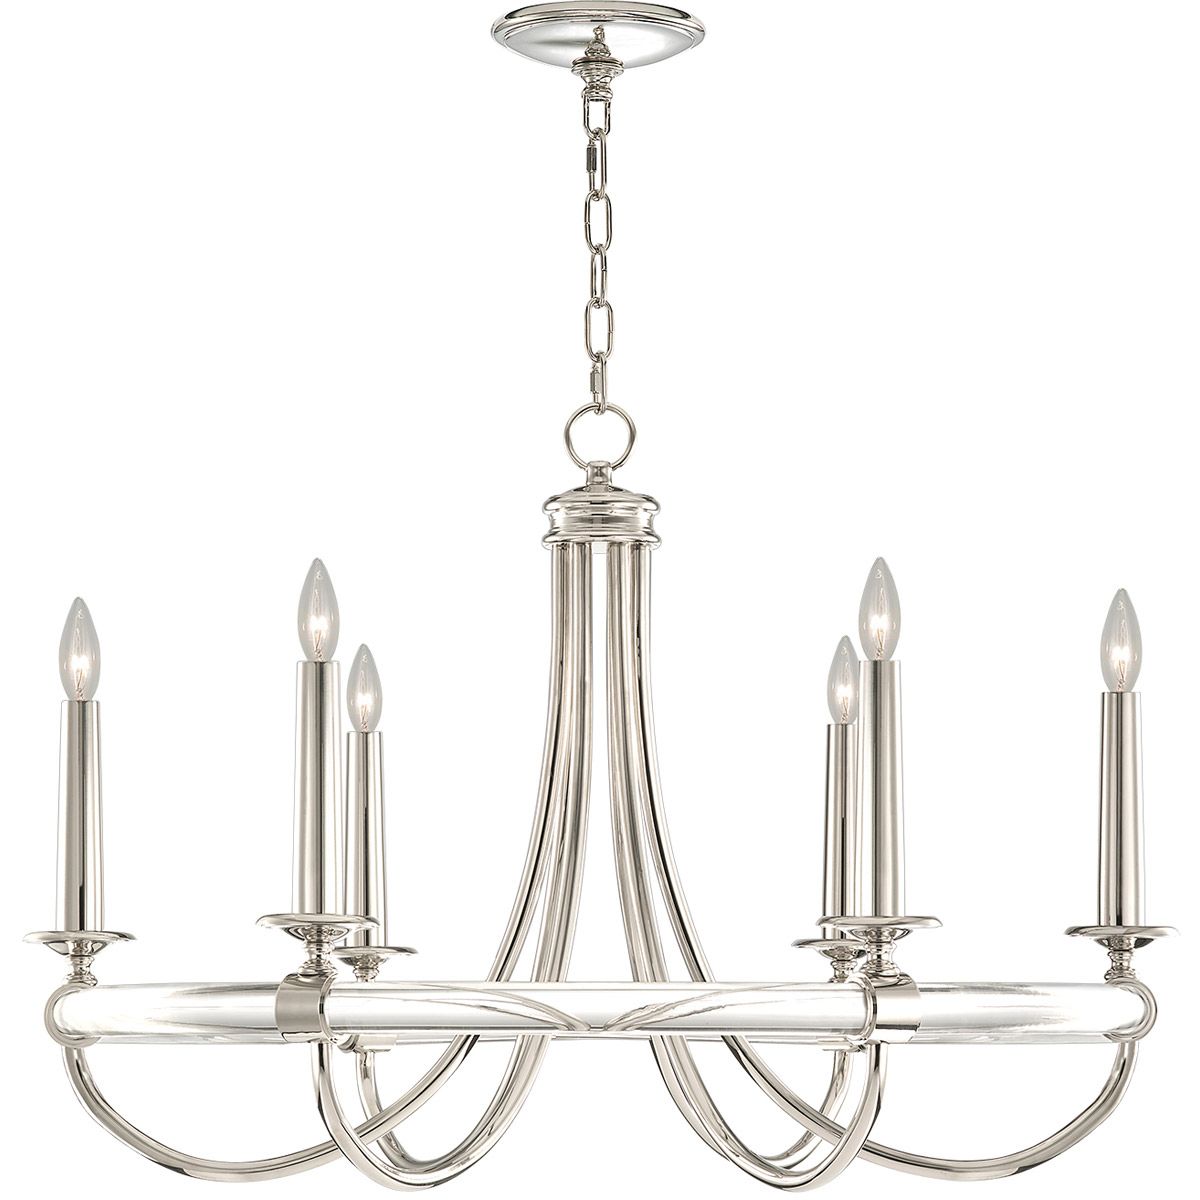 Fine Art Lamps 846140st Grosvenor Square 6 Light 34 Inch Intended For Paladino 6 Light Chandeliers (View 25 of 30)